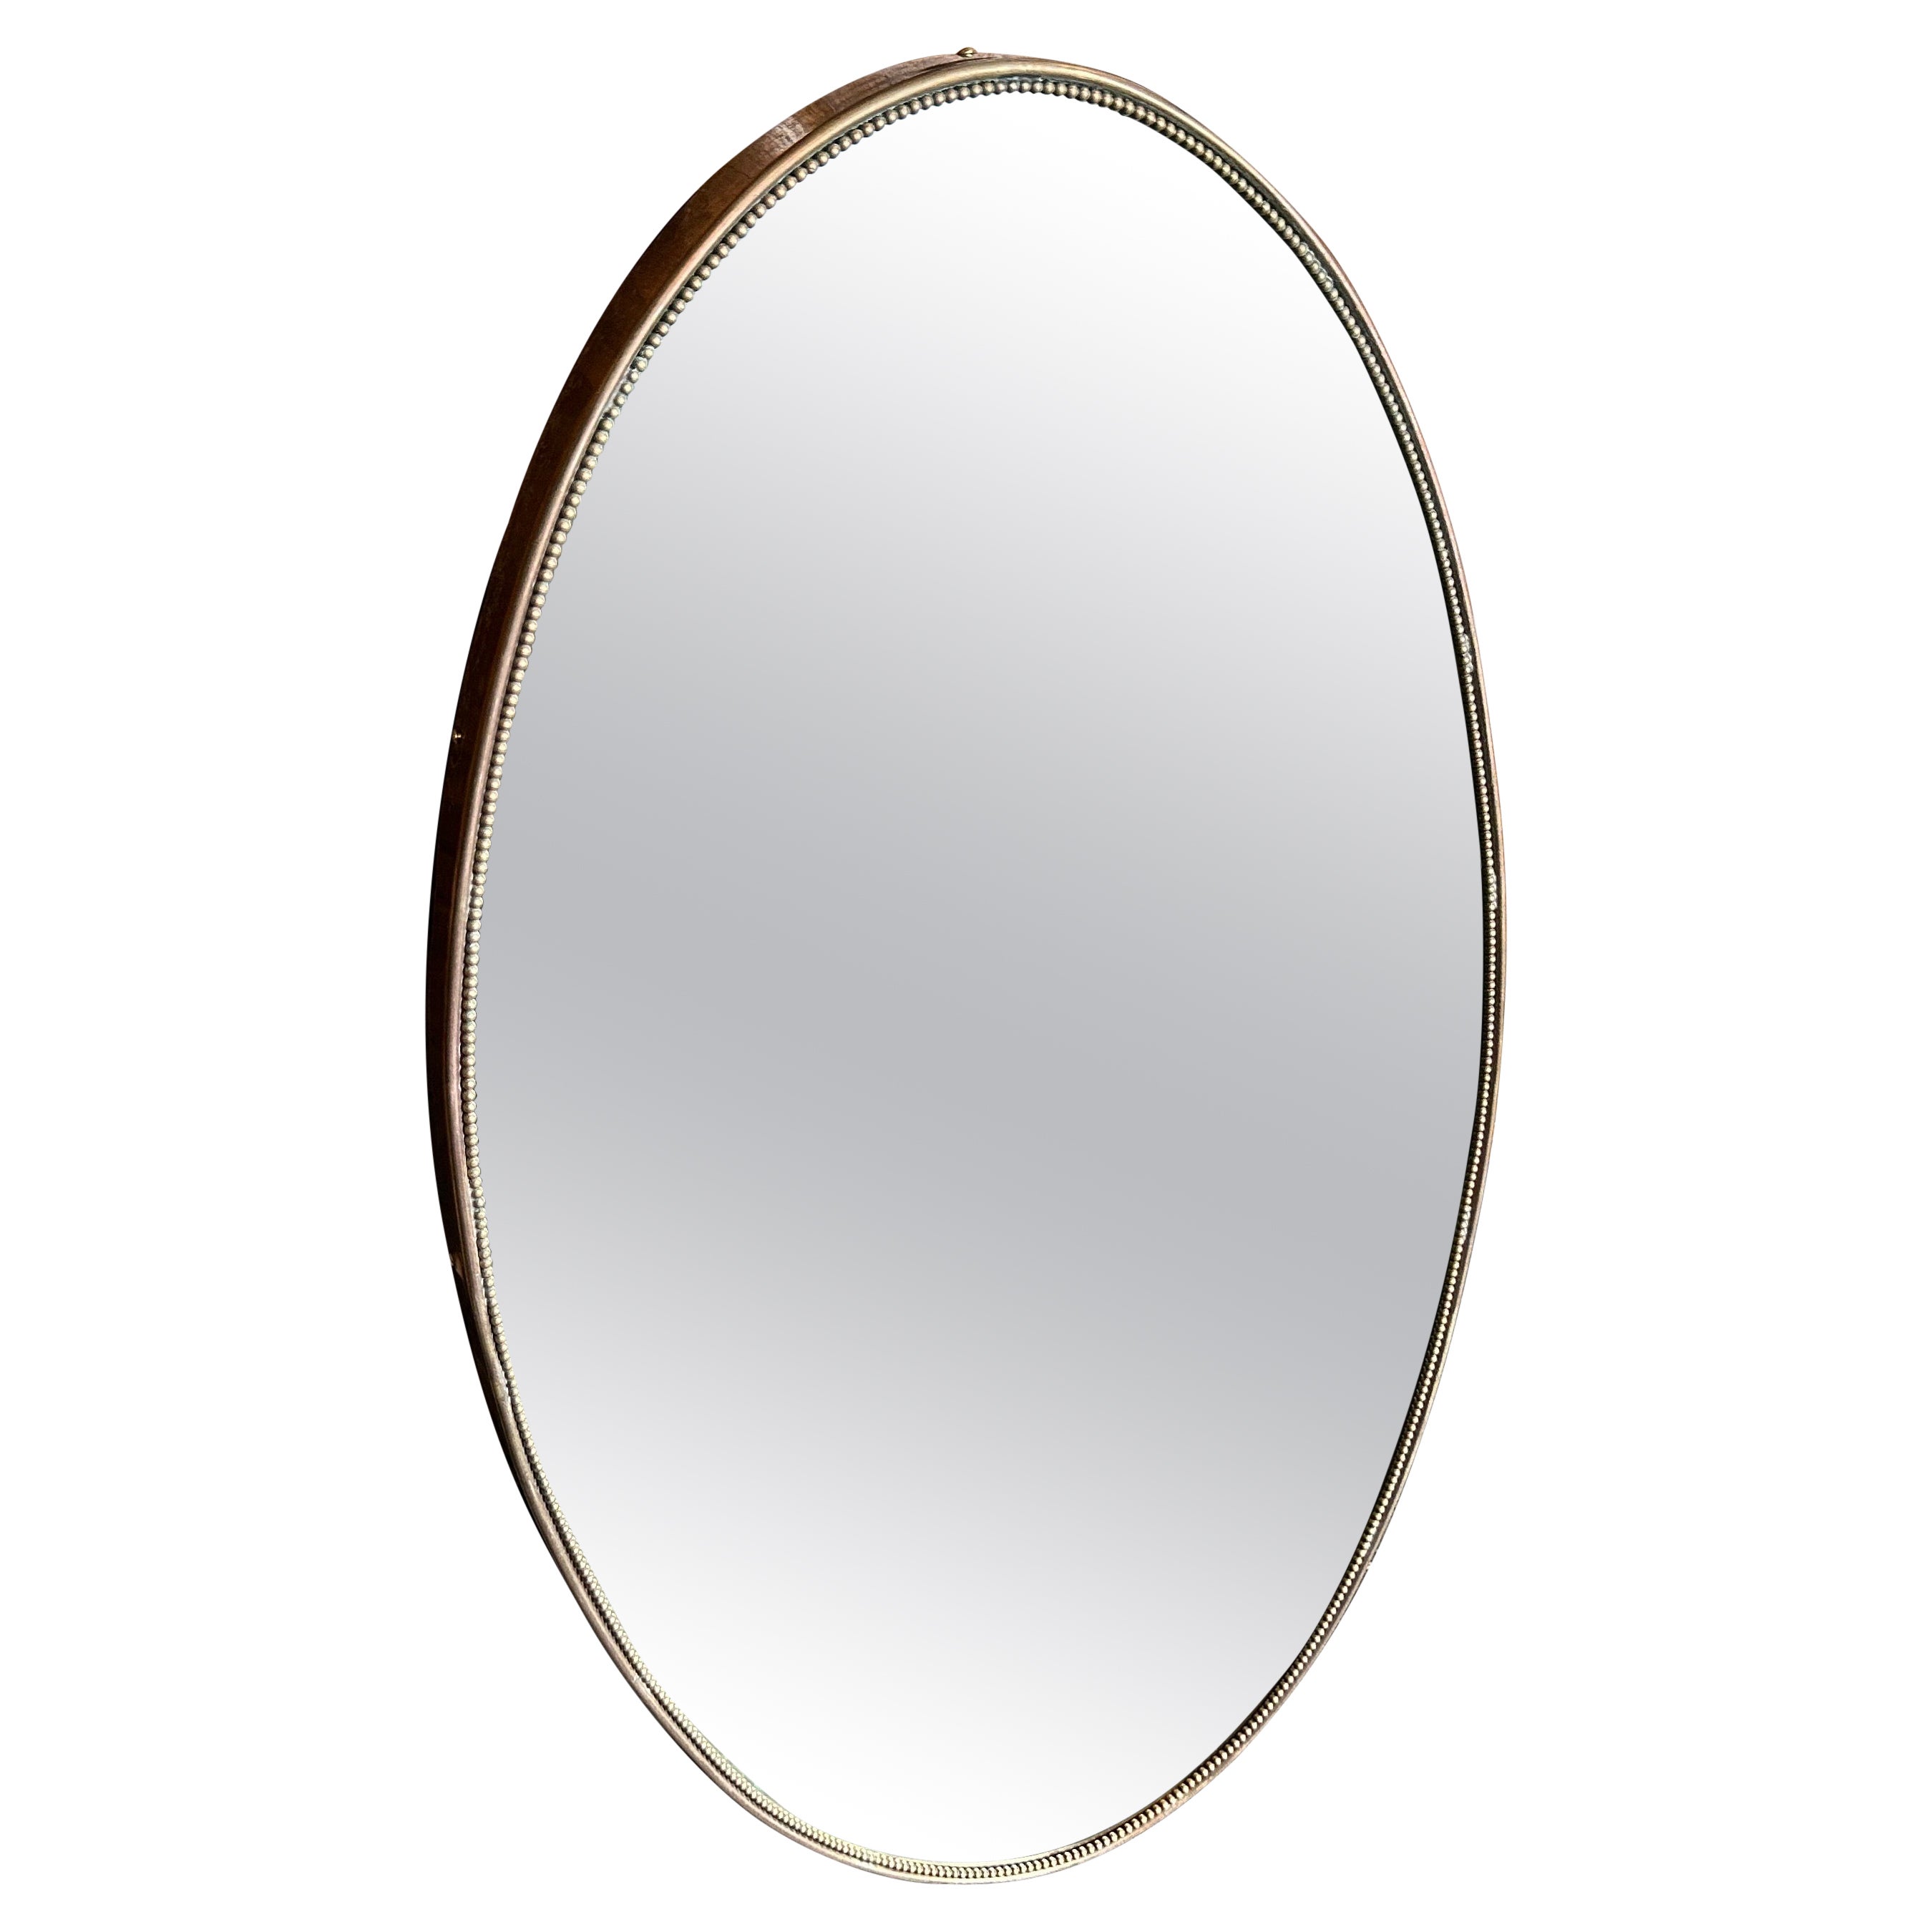 1960s Gio Ponti Style Mid-Century Modern Brass Oval Wall Mirror For Sale